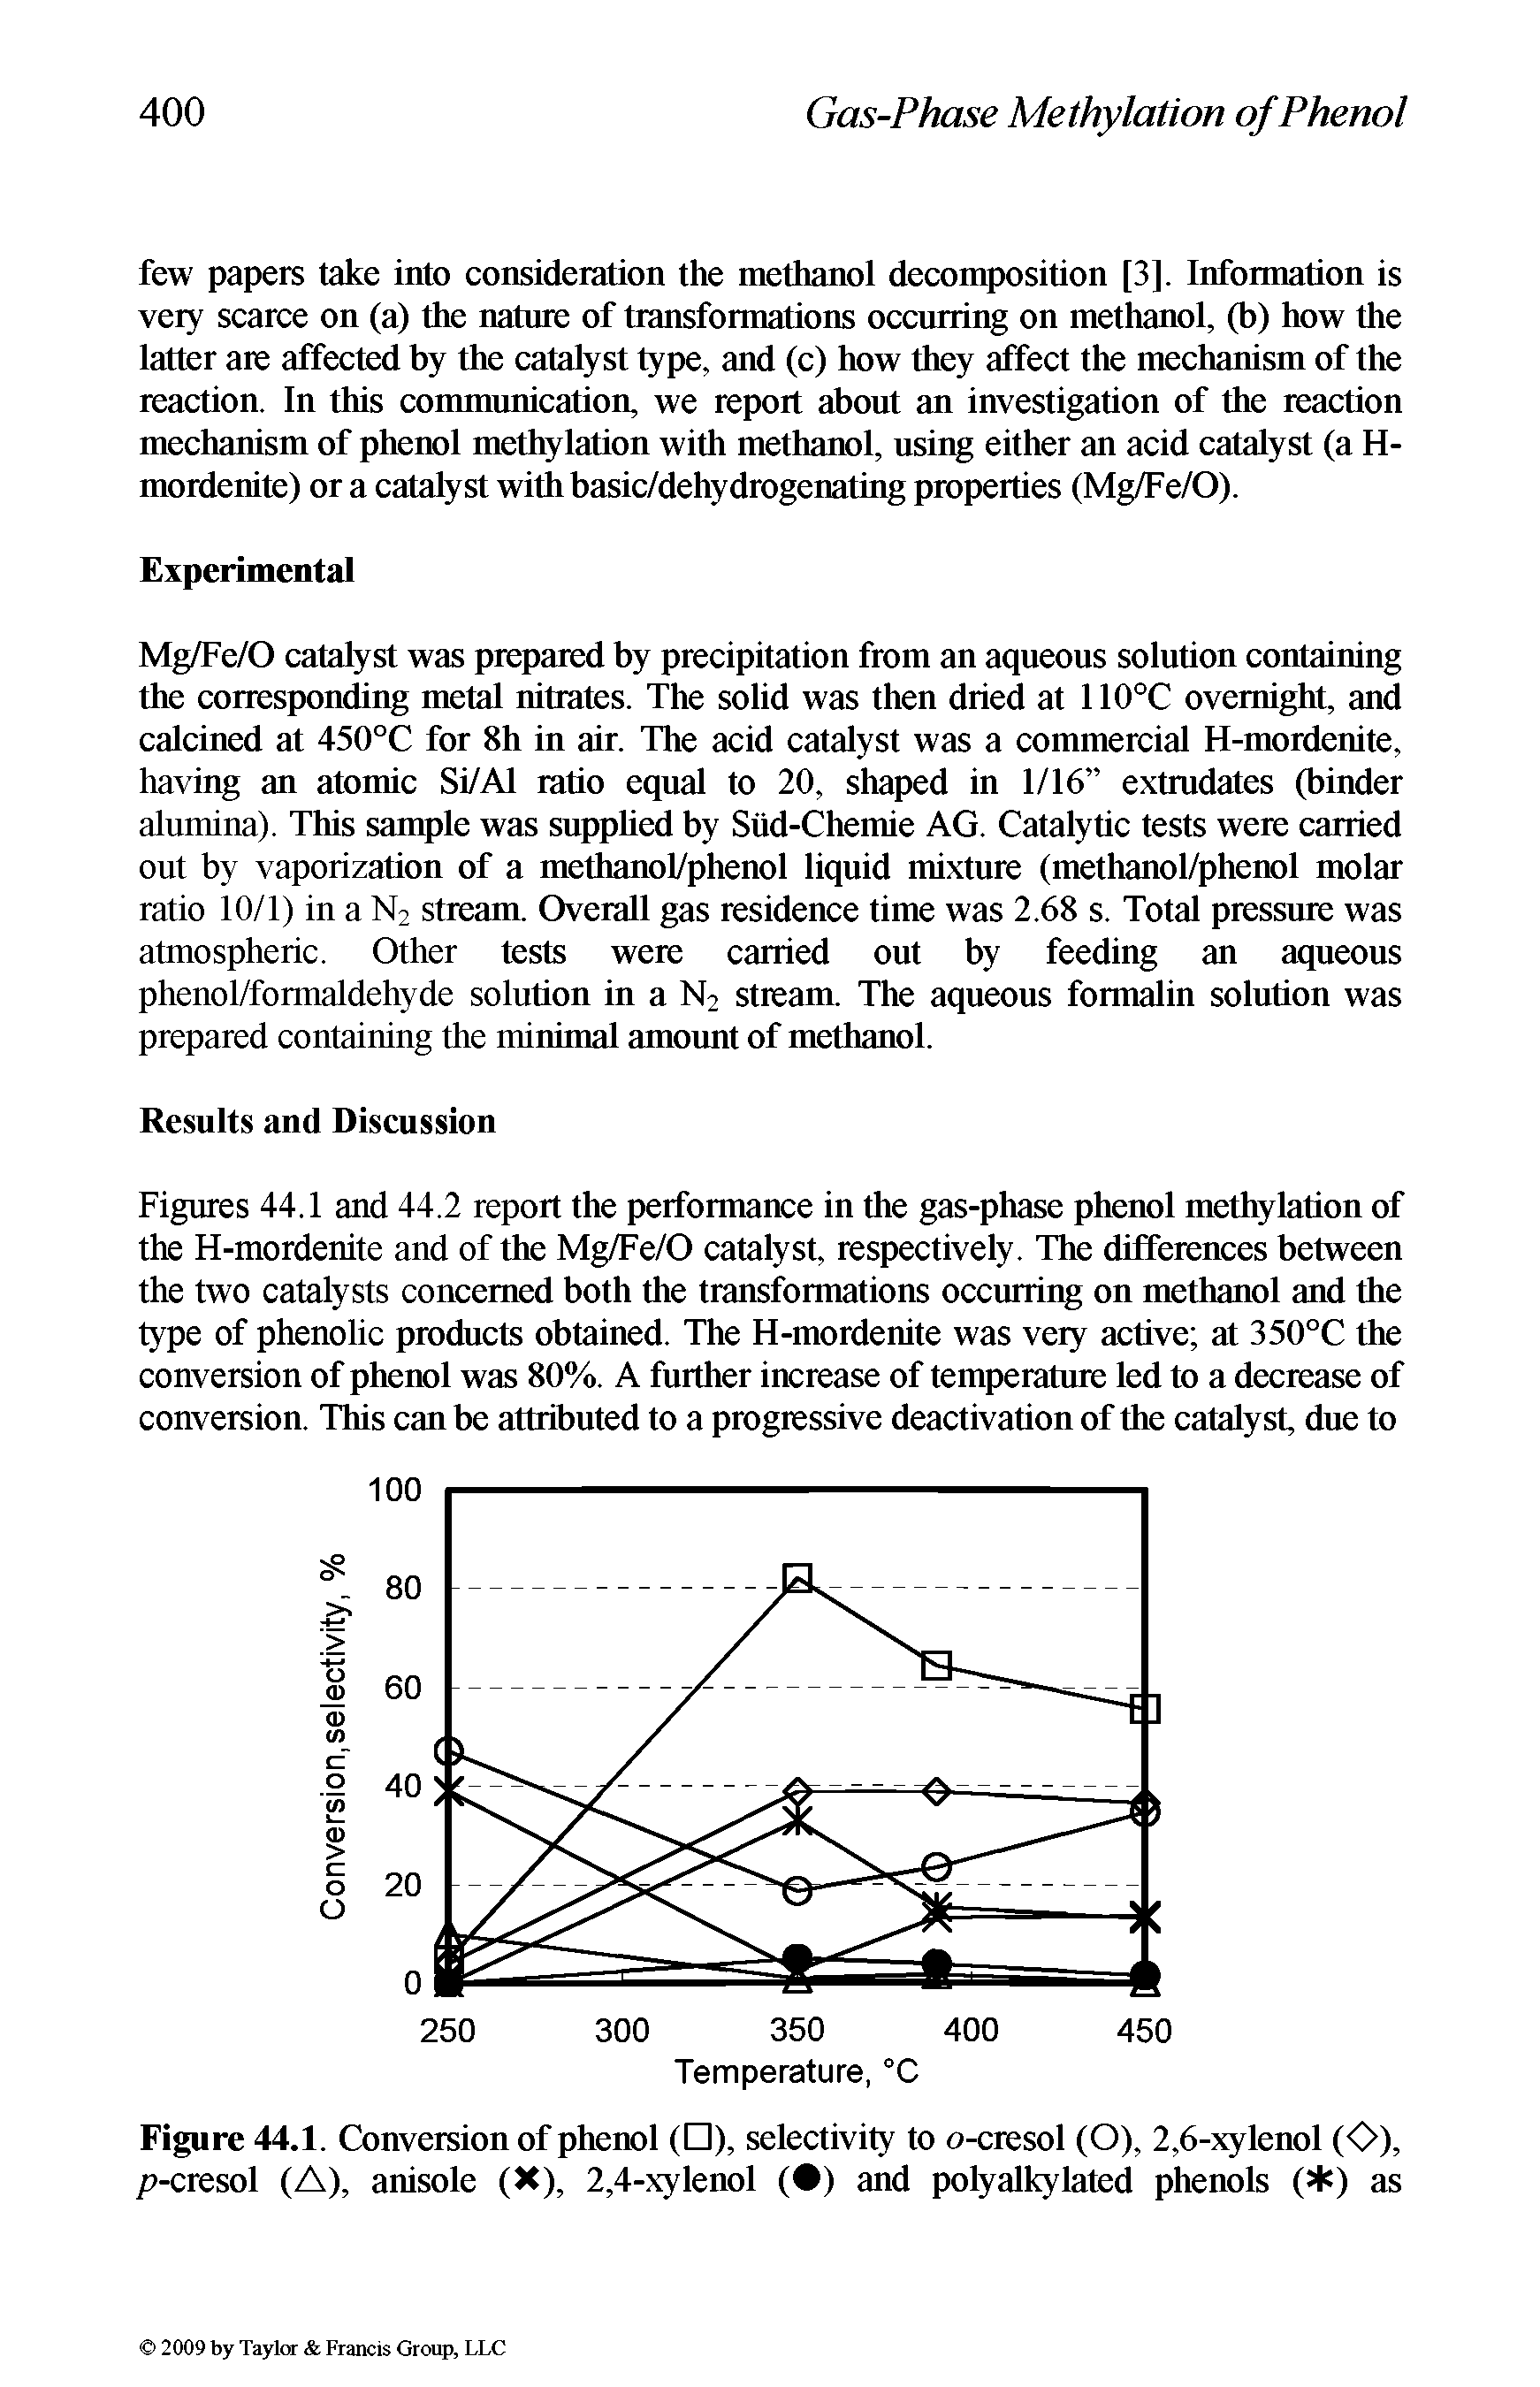 Figures 44.1 and 44.2 report the performance in the gas-phase phenol methylation of the H-mordenite and of the Mg/Fe/O catalyst, respectively. The differences between the two catalysts concerned both the transformations occurring on methanol and the type of phenolic products obtained. The H-mordenite was very active at 350°C the conversion of phenol was 80%. A further increase of temperature led to a decrease of conversion. This can be attributed to a progressive deactivation of the catalyst, due to...